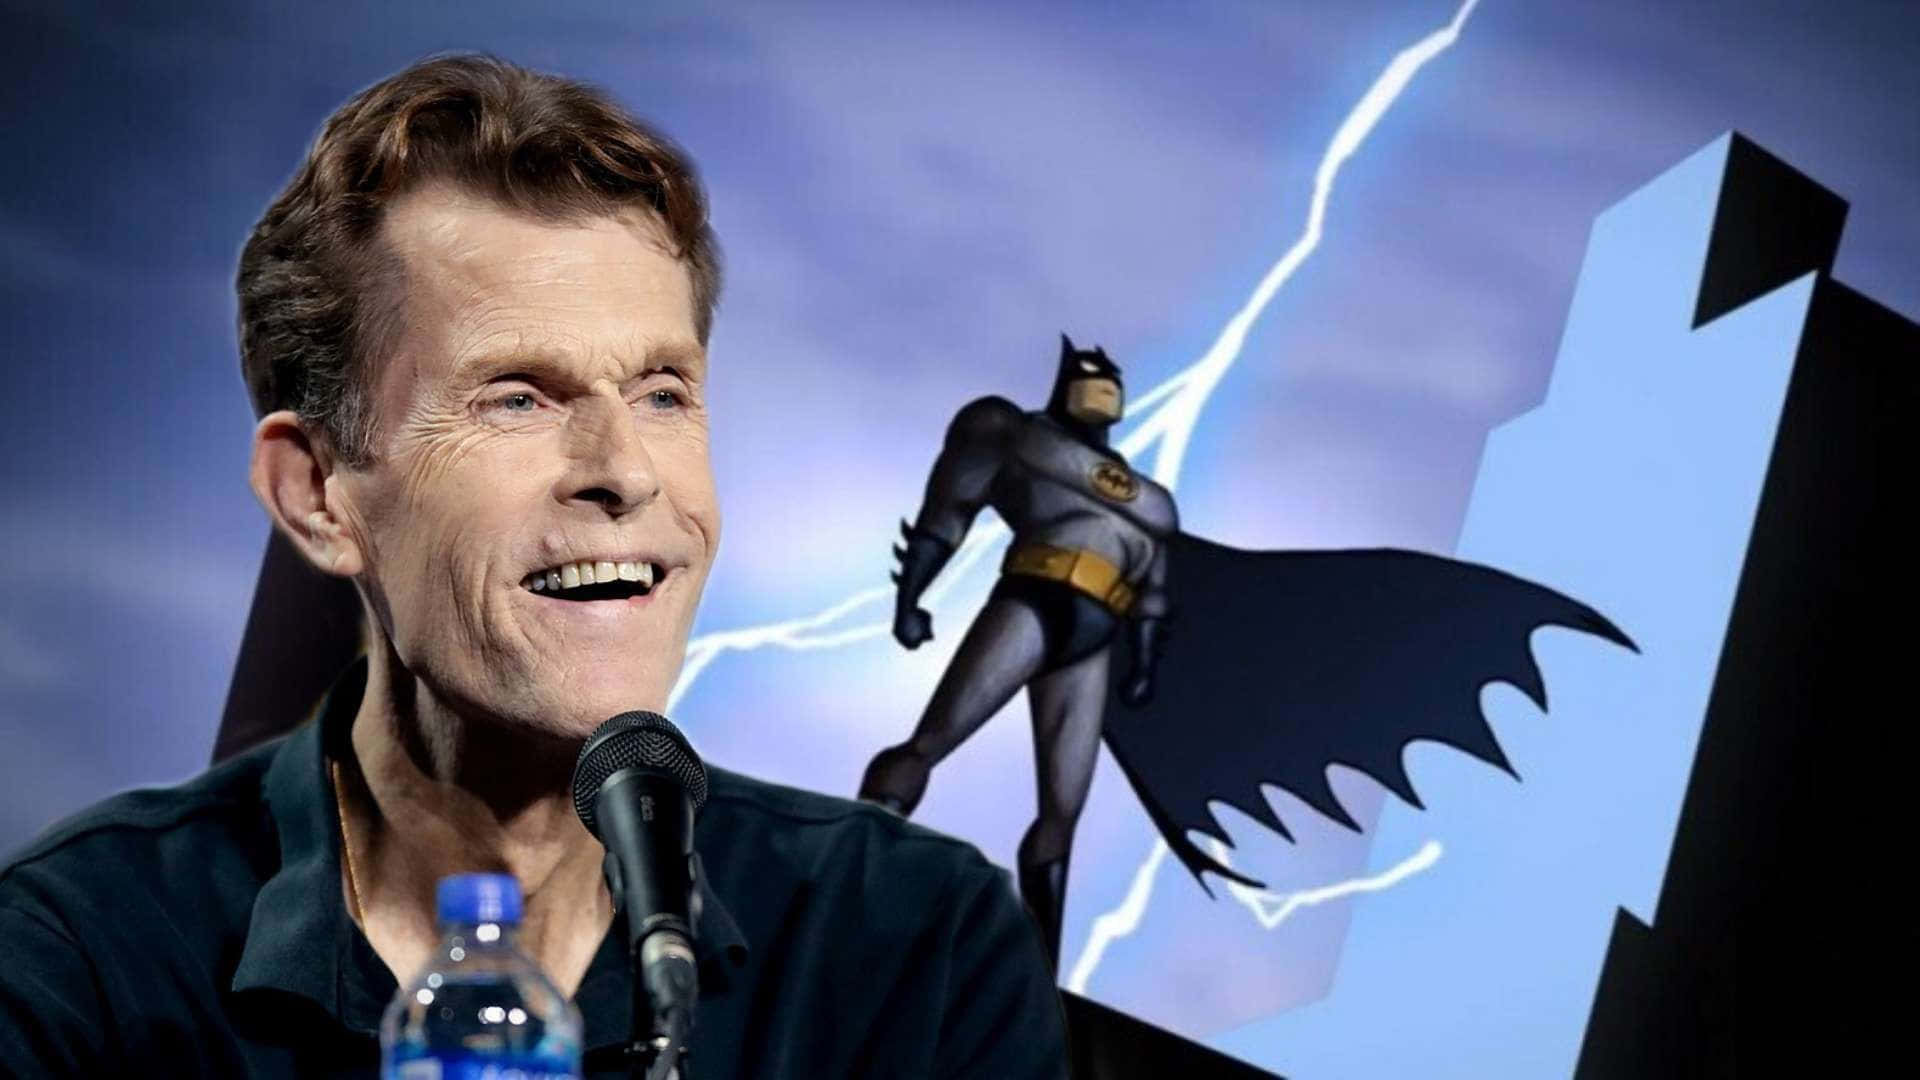 Kevin Conroy posing for a portrait Wallpaper